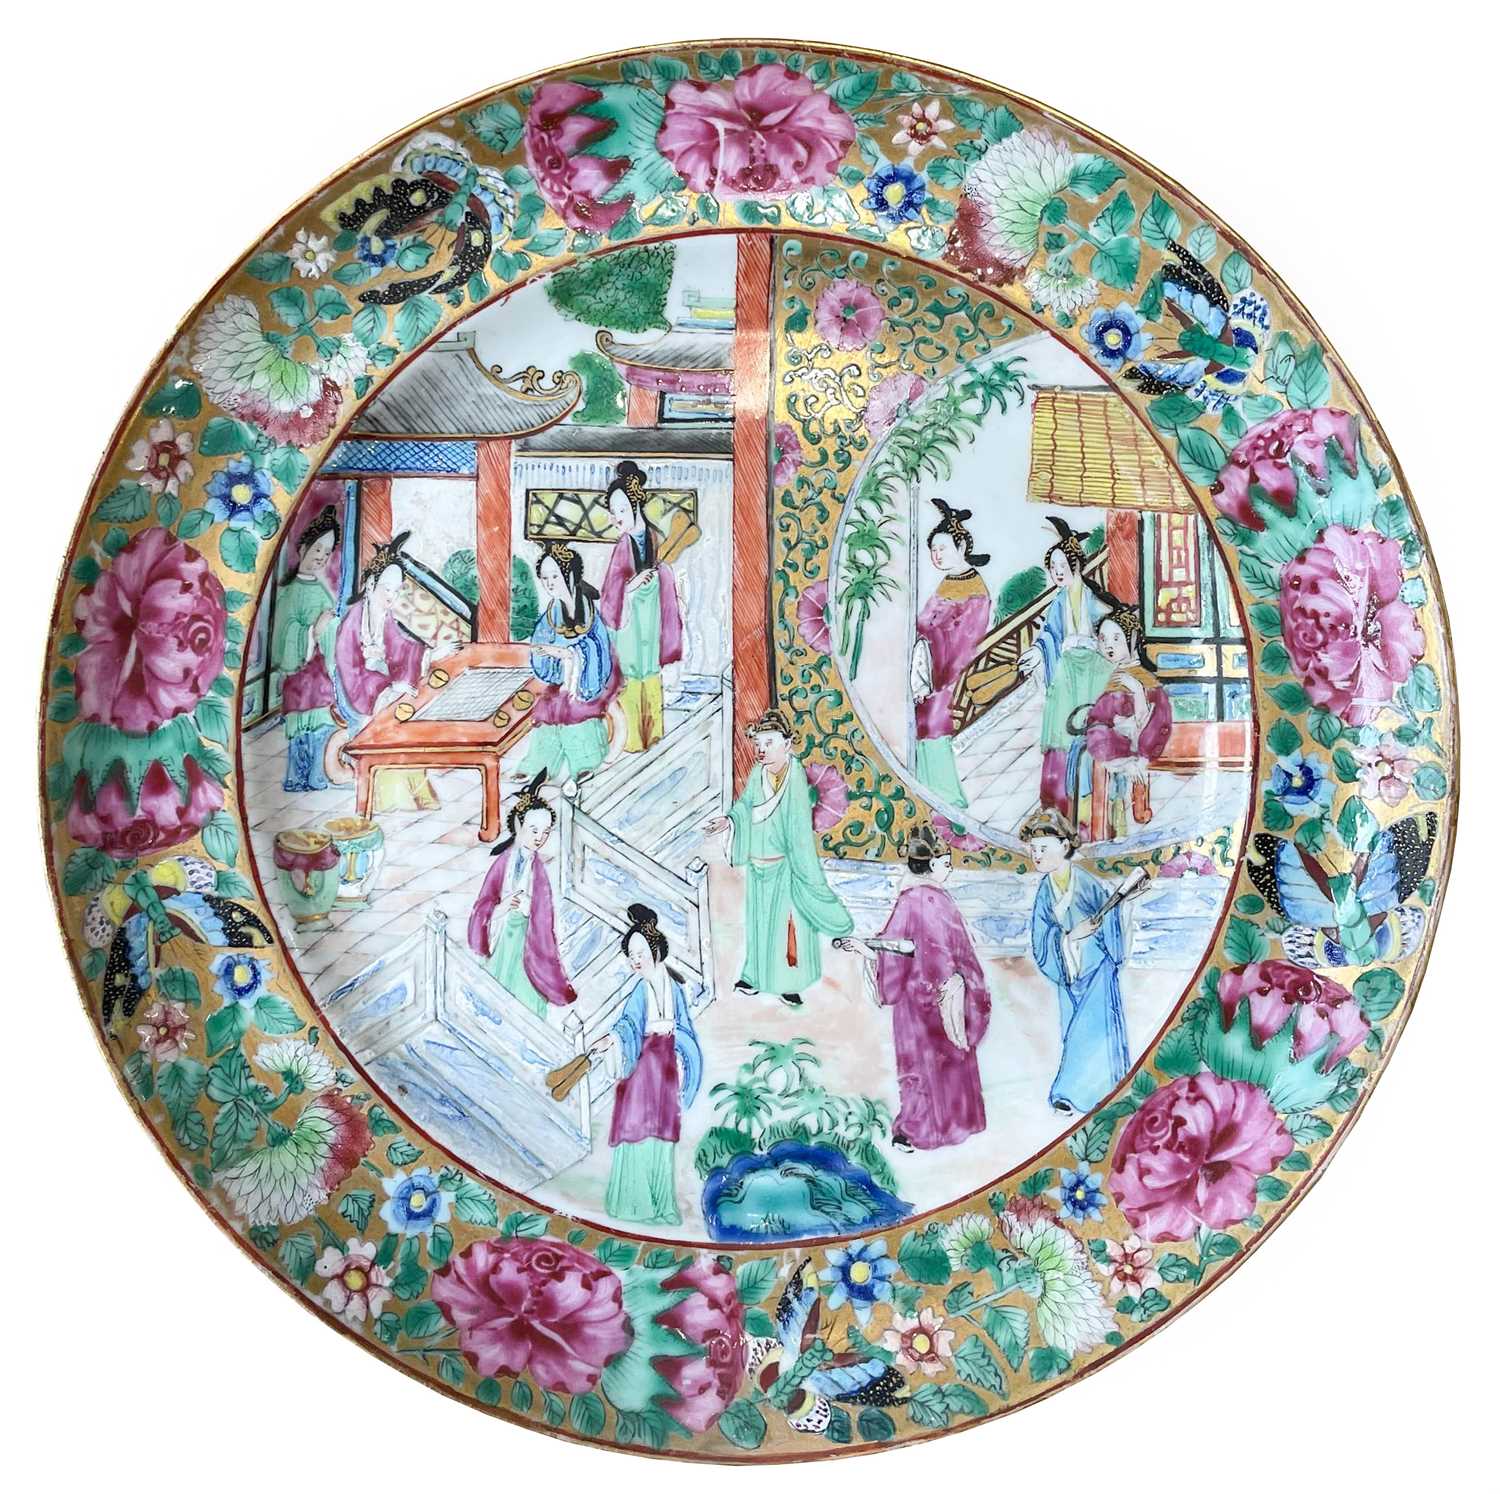 A Chinese Canton Decorated Persian-Market Plate, circa 1855, typically painted in famille rose